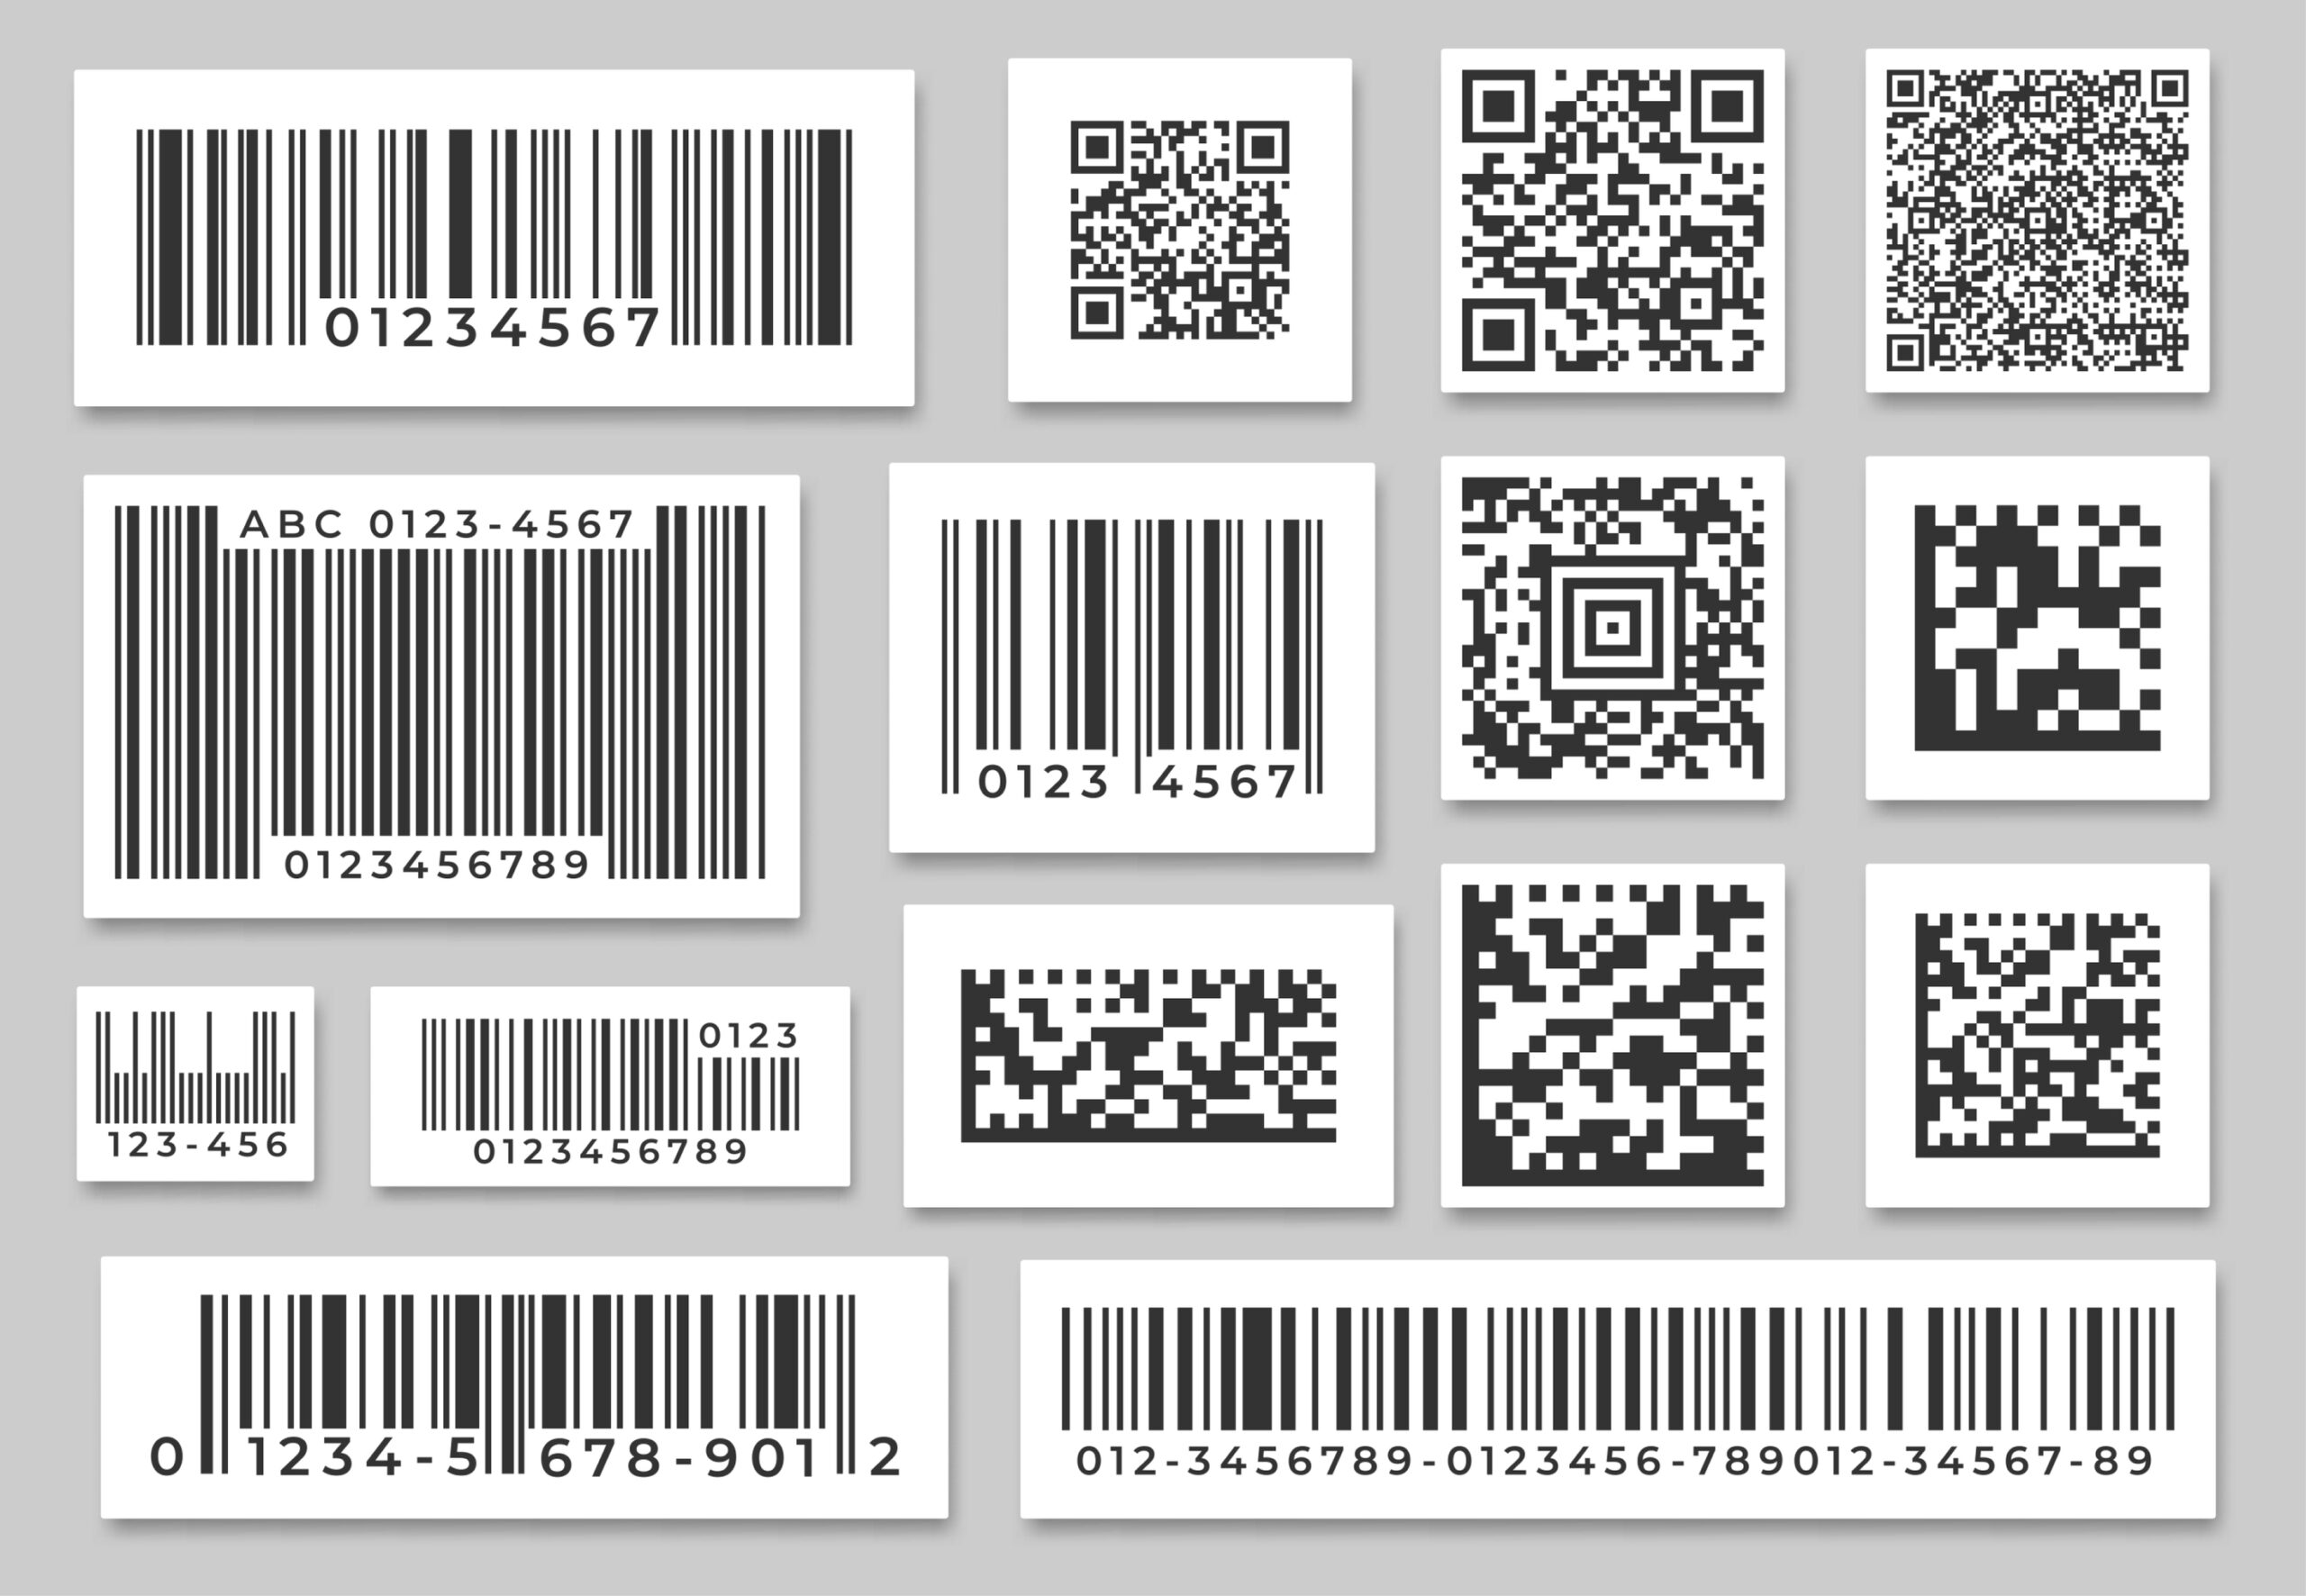 How to Identify Barcode Types Visually 